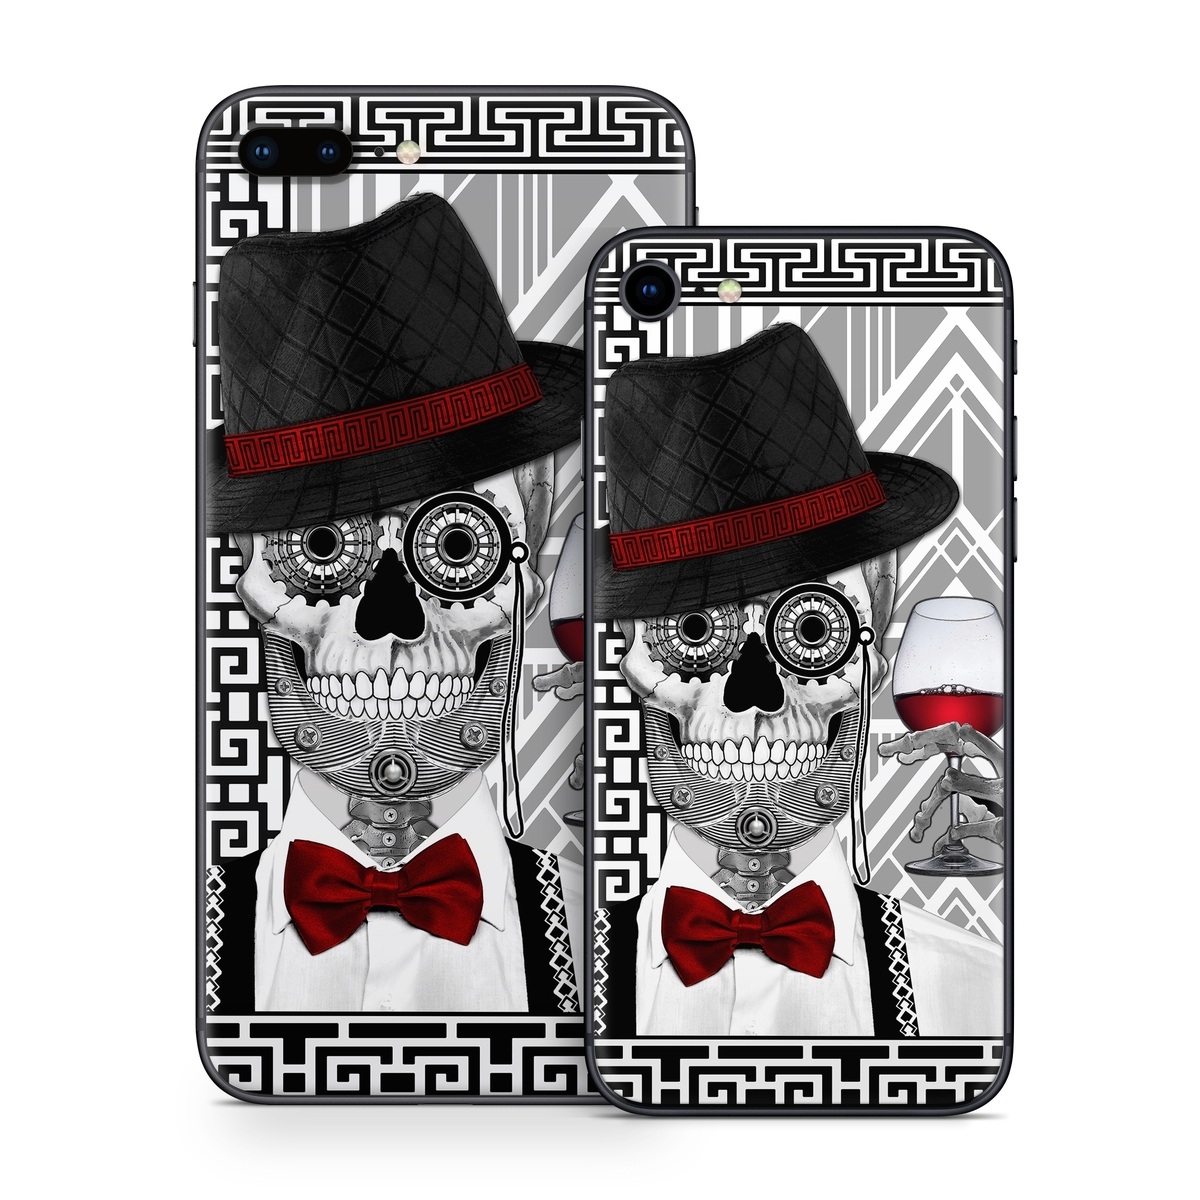  Skin design of Cartoon, Poster, Font, Illustration, Headgear, Games, Photo caption, Fictional character, Graphic design, Hat, with black, white, red colors